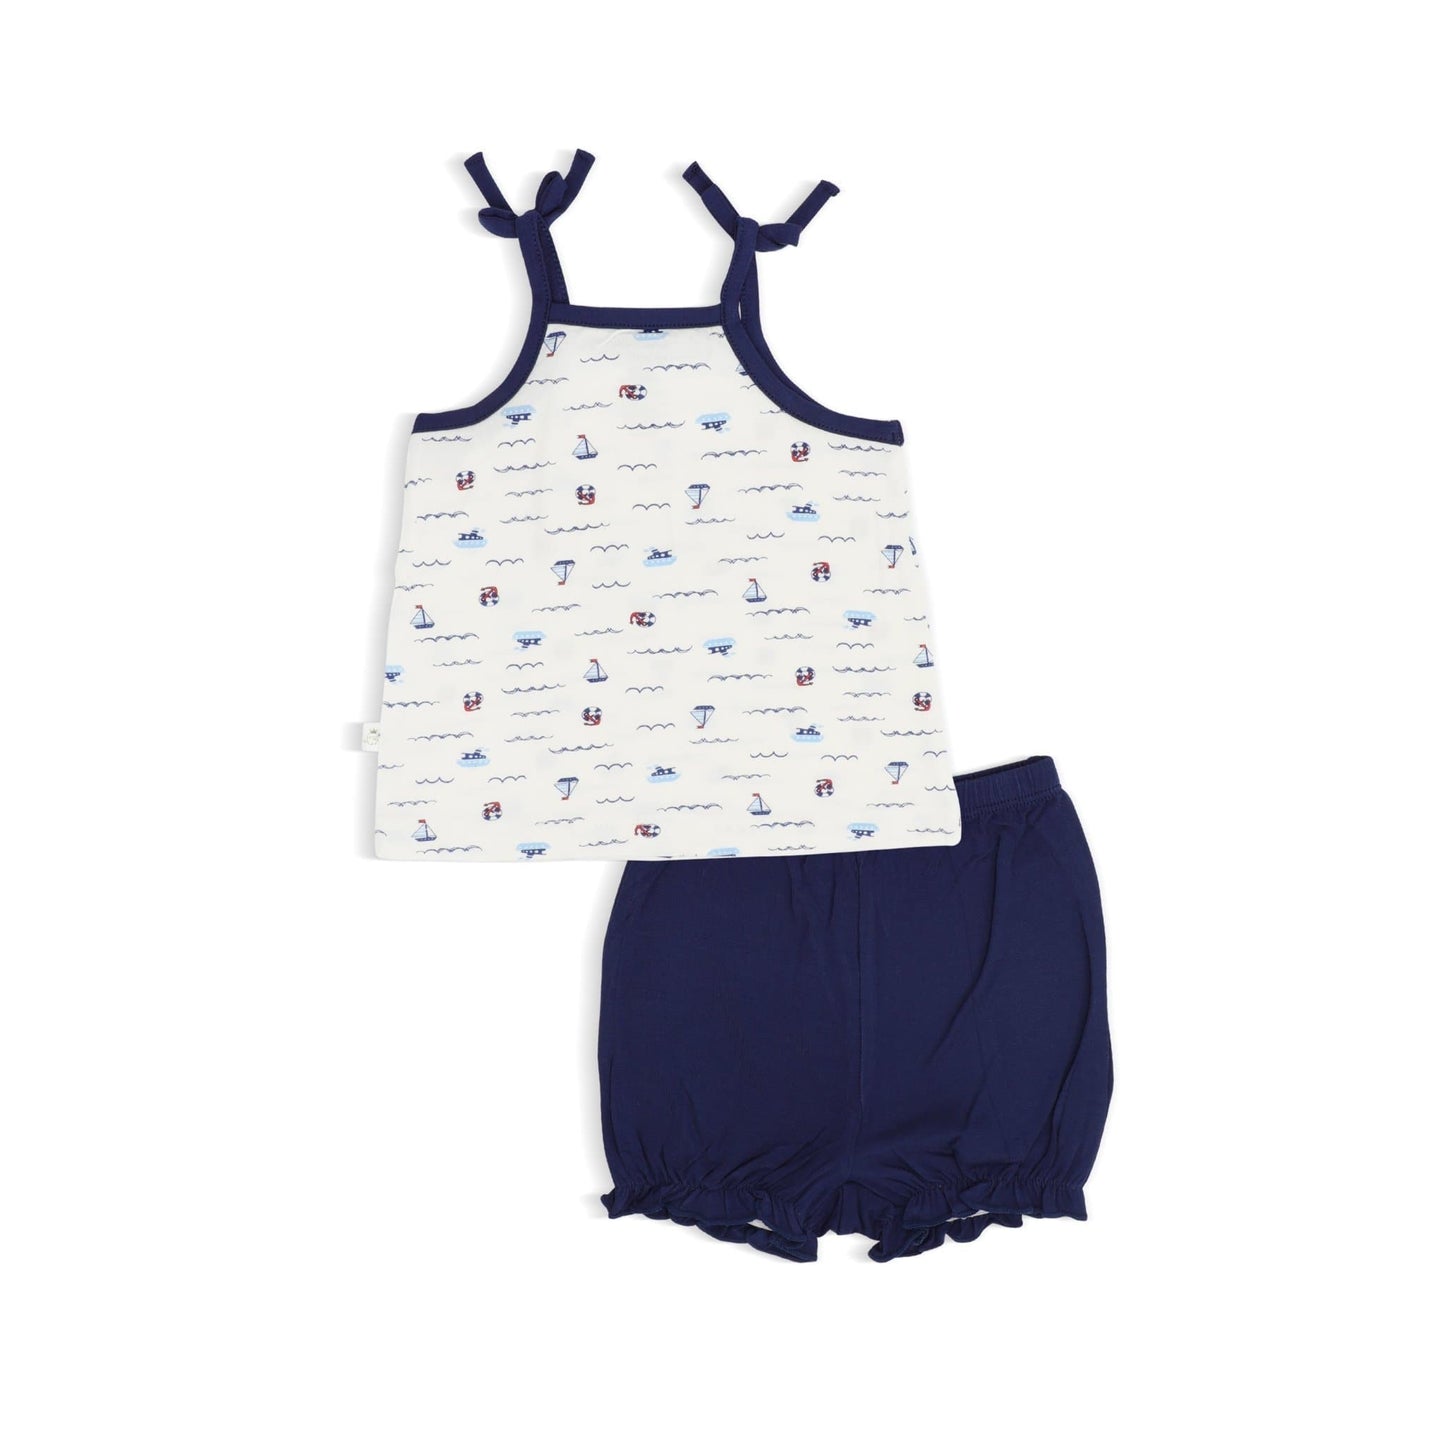 Sailing - Blouse with Spaghetti Tie & Bloomer Shorts Set by simplylifebaby